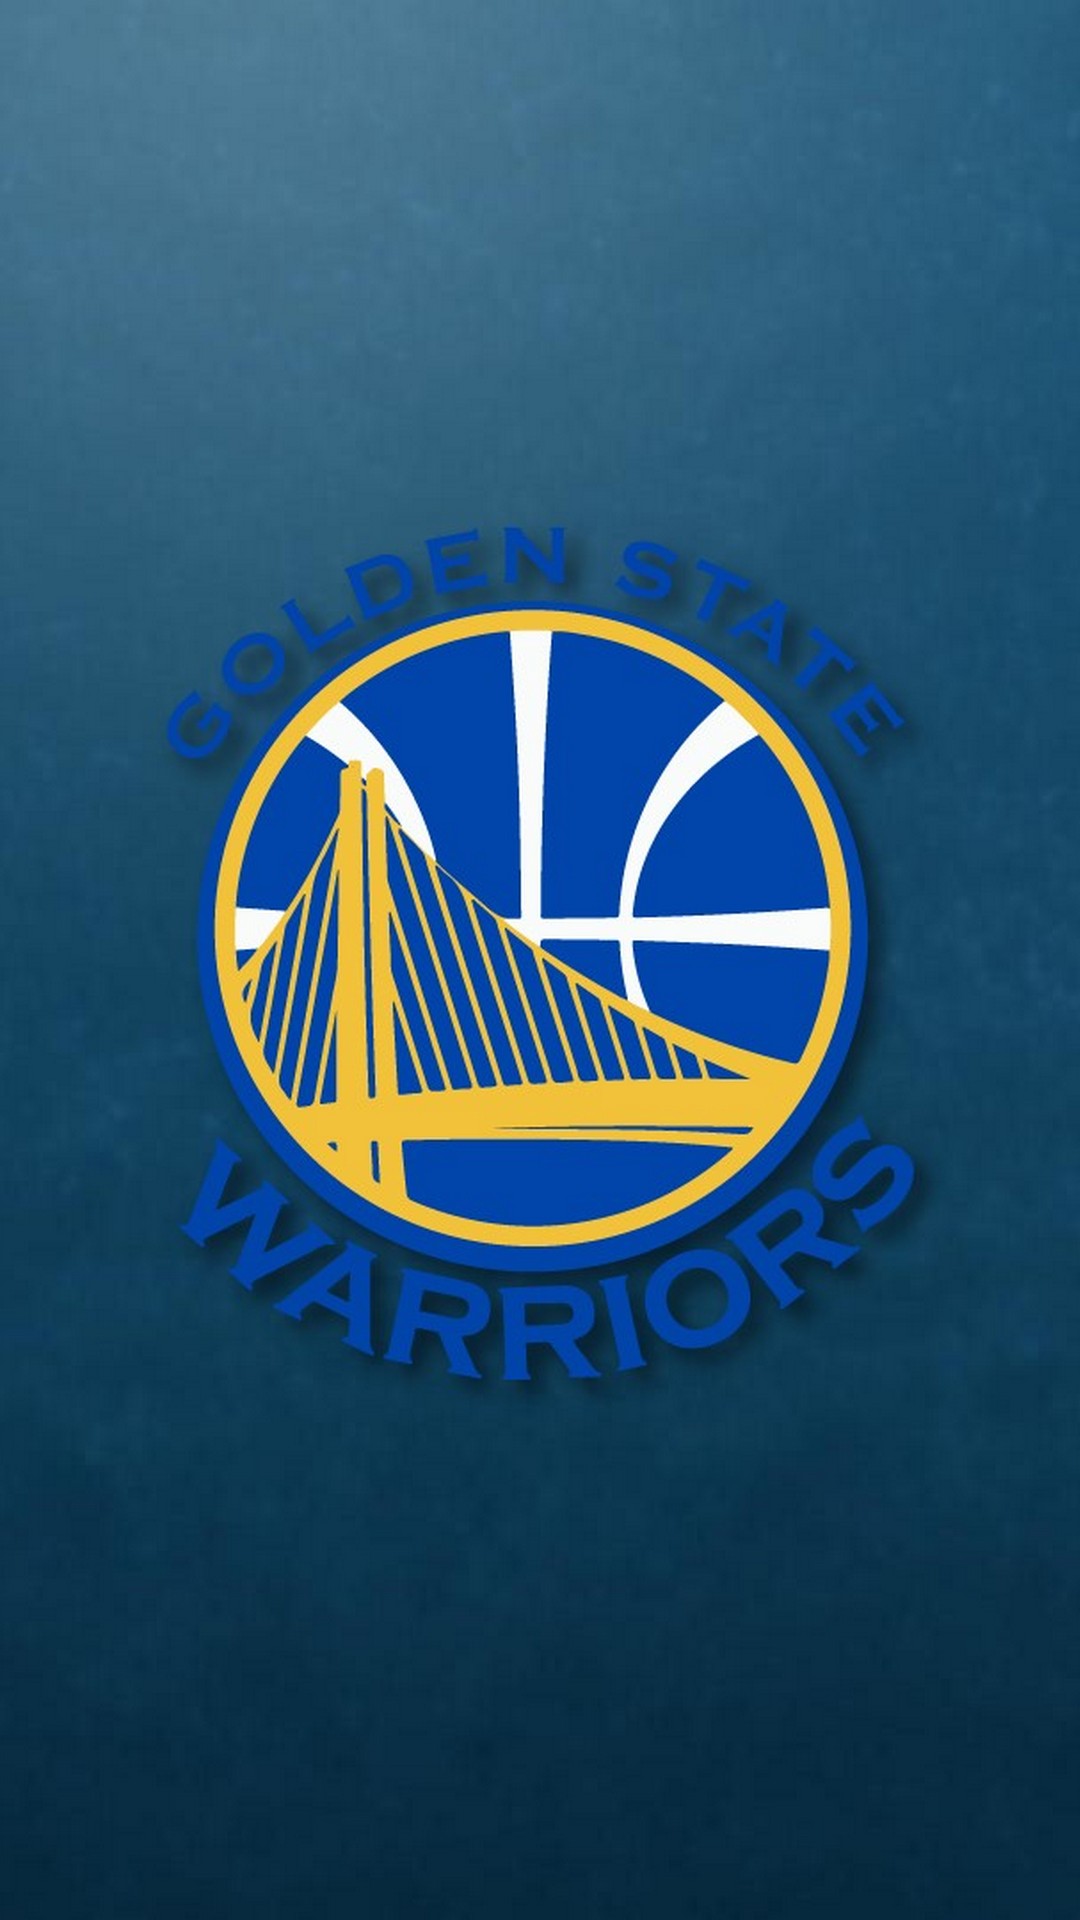 Golden State Warriors Phone Backgrounds With Resolution 1080X1920 pixel. You can make this wallpaper for your Desktop Computer Backgrounds, Mac Wallpapers, Android Lock screen or iPhone Screensavers